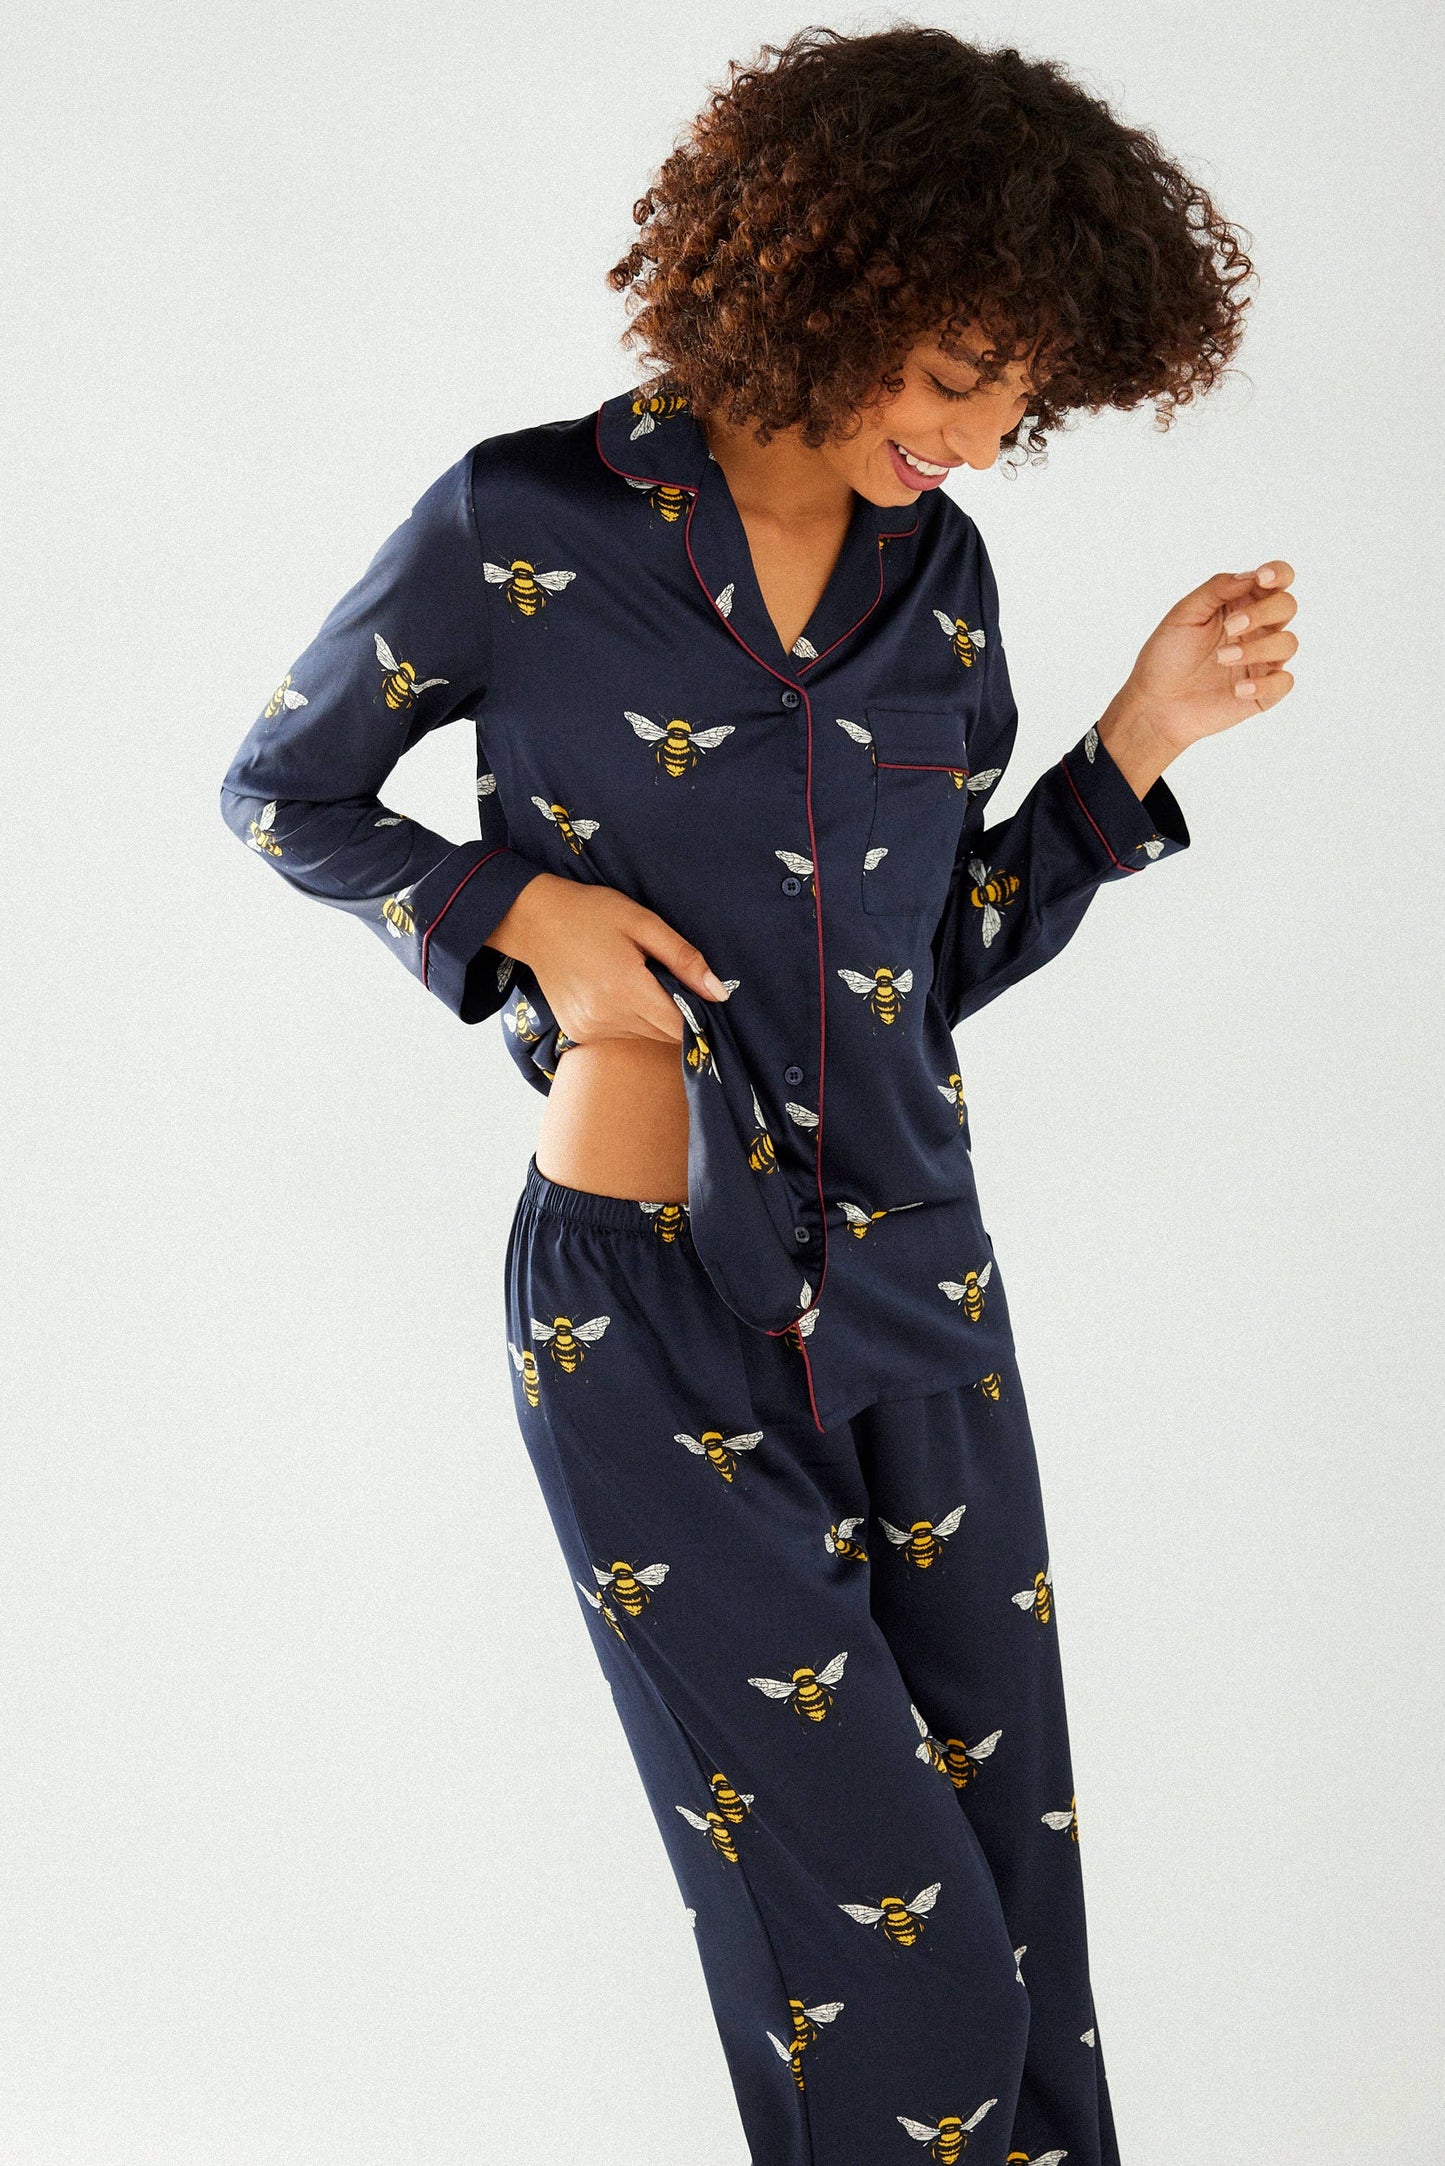 Chelsea Peers Satin Navy Bee Long Button Up Set